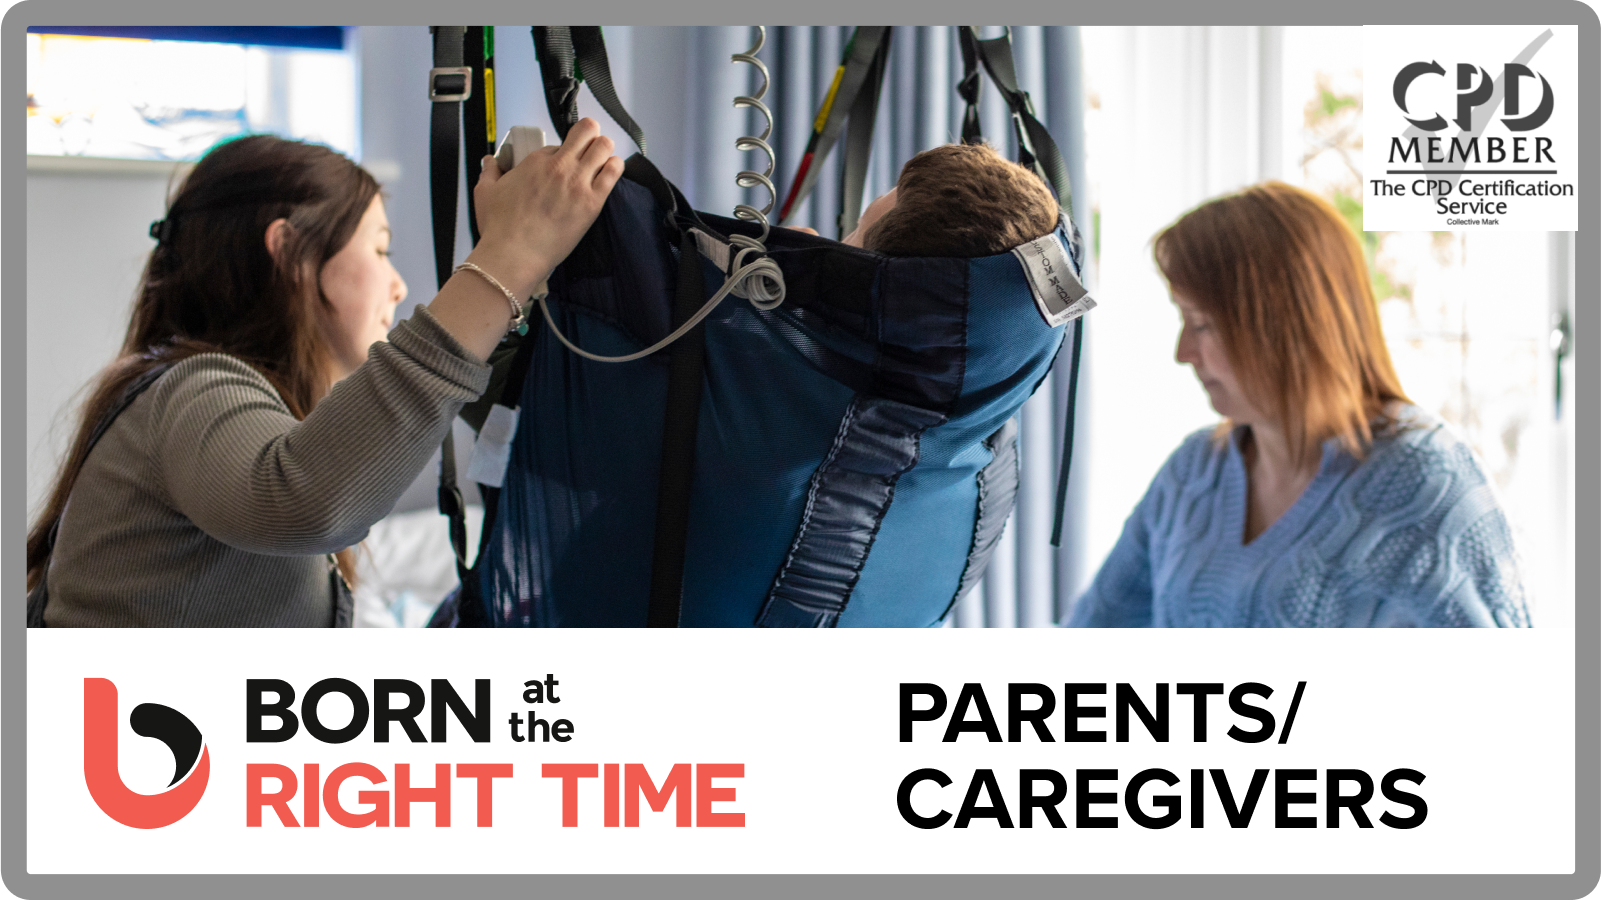 Introduction to 24-hour Postural Care for Parents/Caregivers